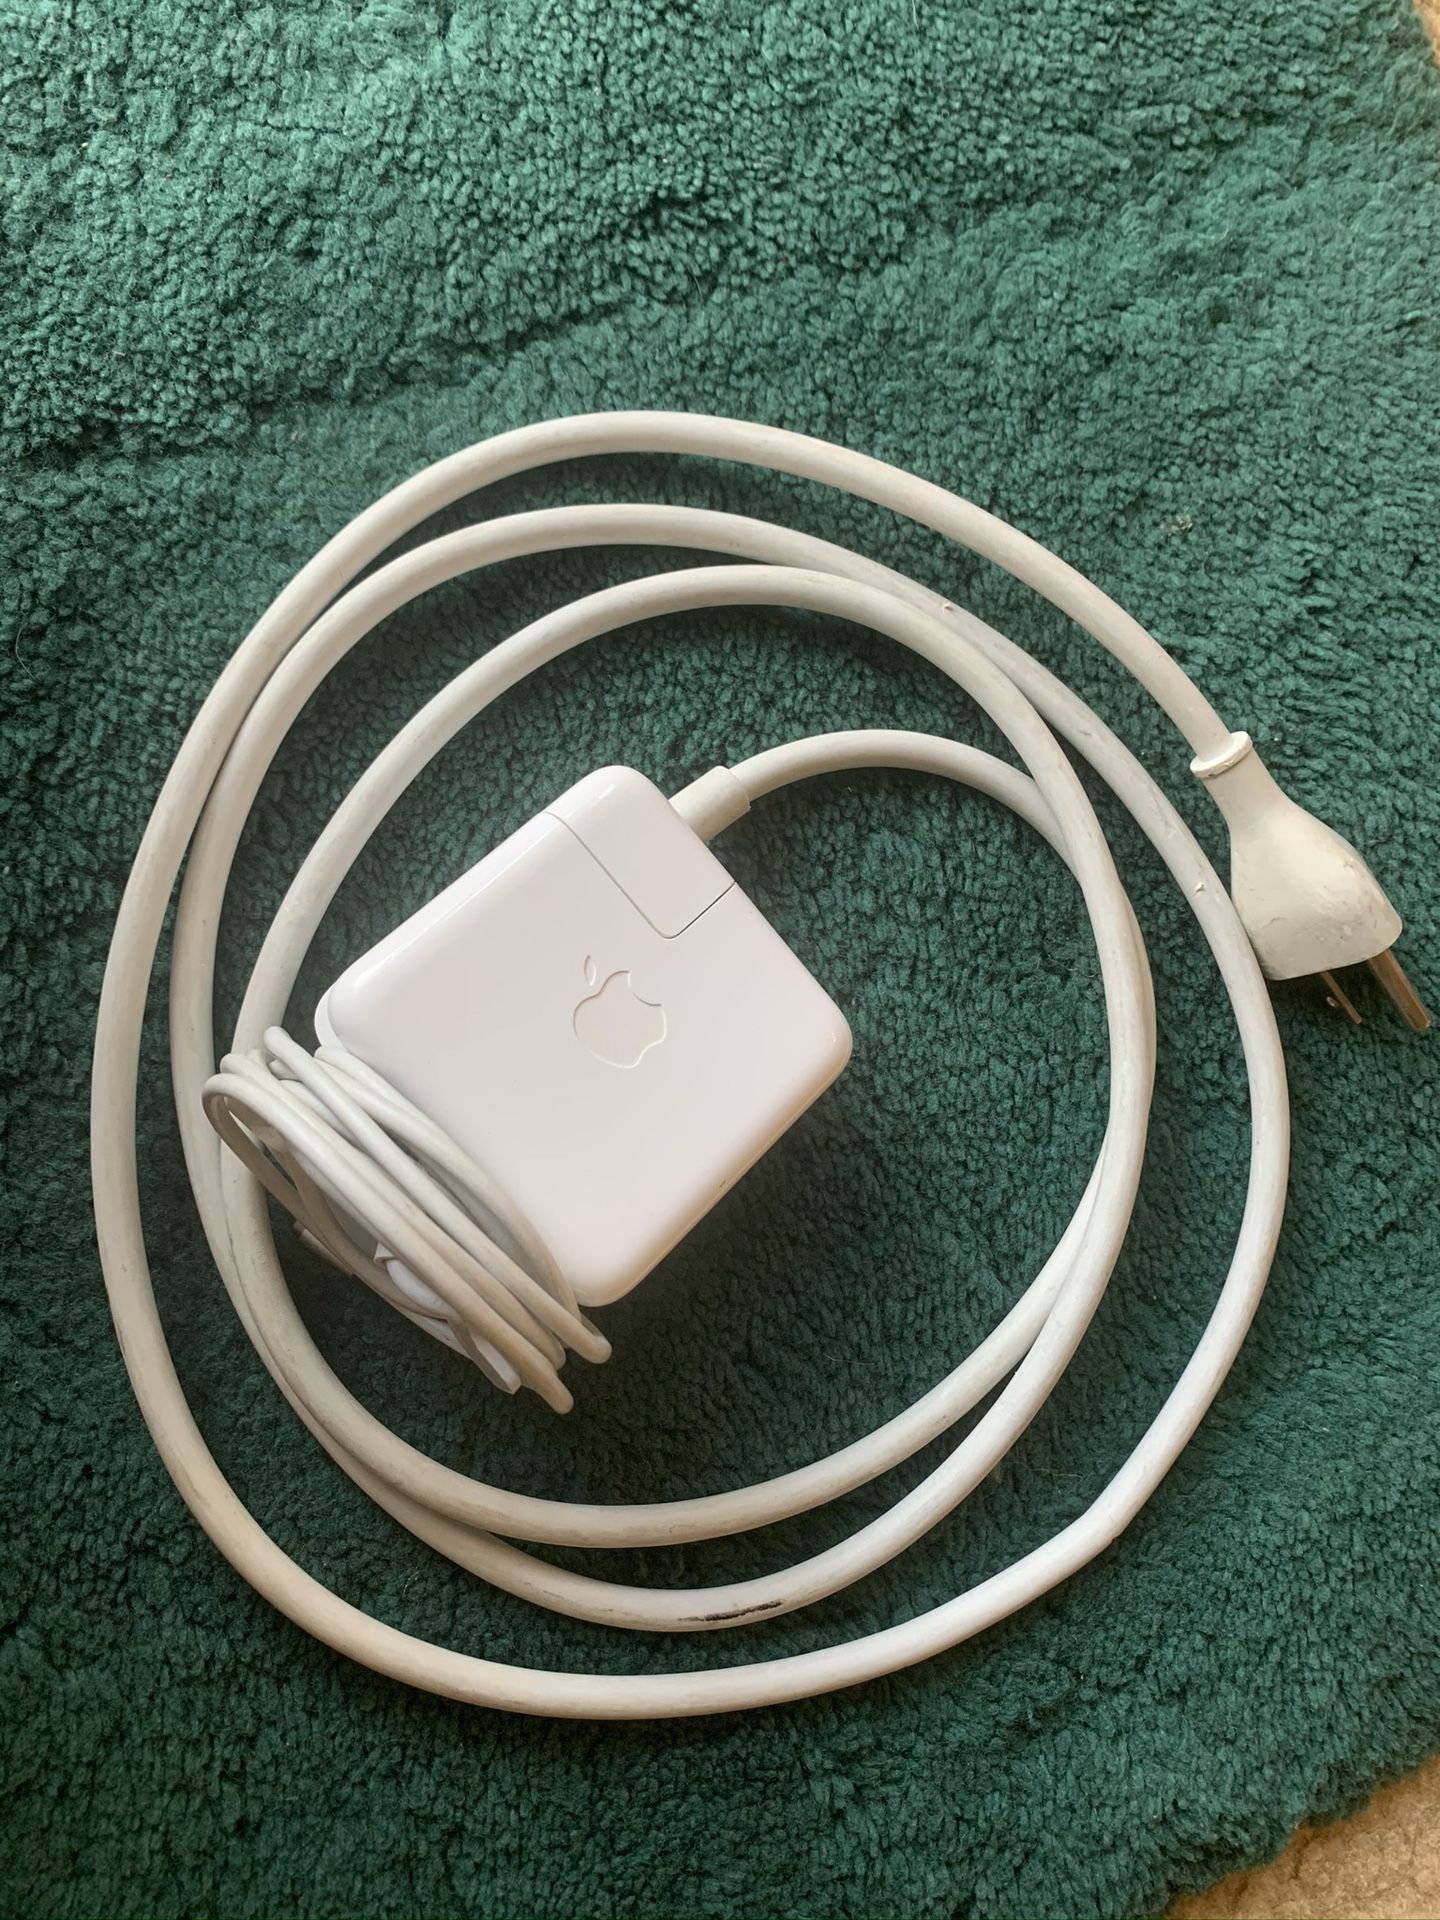 MacBook Air Charger